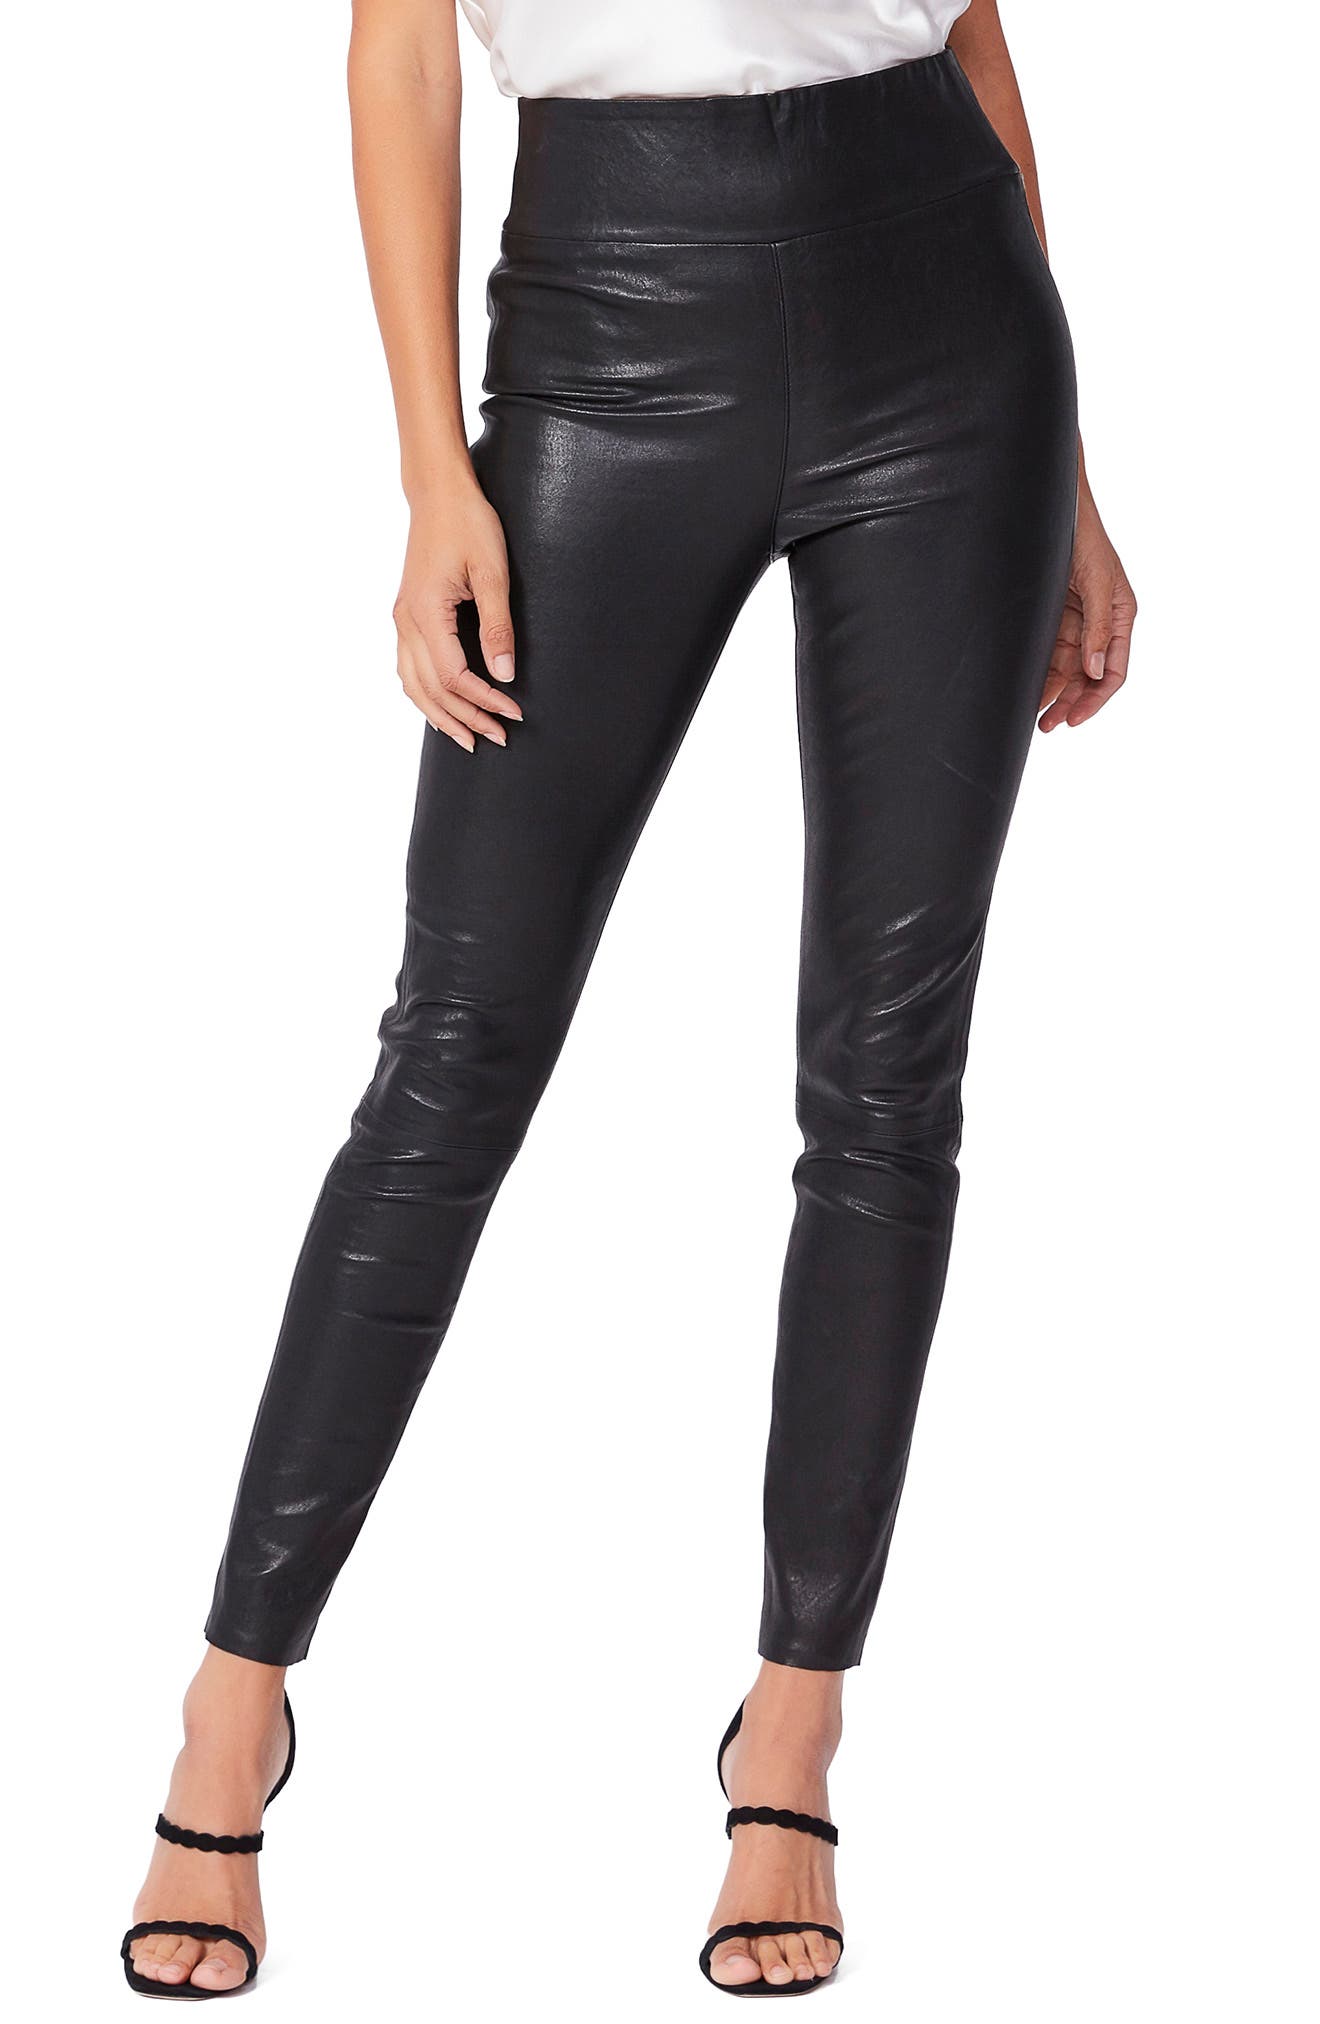 leather pants for women near me